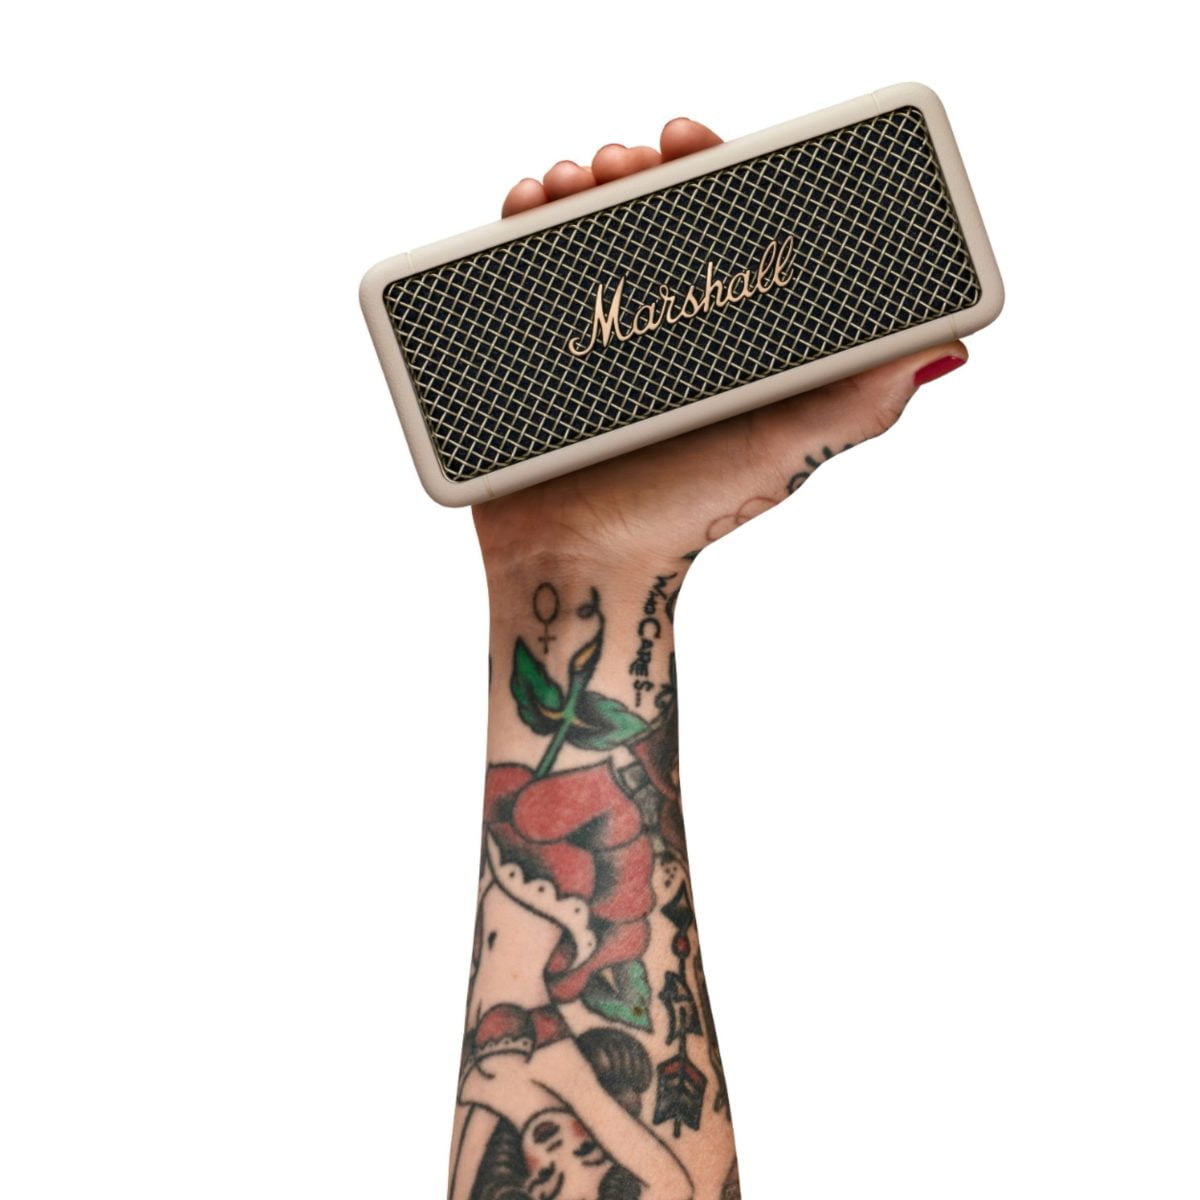 6463394Cv21D Scaled Marshall &Lt;H1&Gt;Marshall Emberton Portable Bluetooth Speaker - Cream&Lt;/H1&Gt; Https://Www.youtube.com/Watch?V=Wlqi1Ajwjs0 Emberton Is A Compact Portable Speaker With The Loud And Vibrant Sound Only Marshall Can Deliver. Emberton Utilises True Stereophonic, A Unique Form Of Multi-Directional Sound From Marshall. Experience Absolute 360° Sound Where Every Spot Is A Sweet Spot. With 20+ Hours Of Playtime, You Can Enjoy The Superior Sound Of Marshall For Hours On End. Marshall Emberton Bluetooth Speaker Marshall Emberton Bluetooth Speaker - Cream